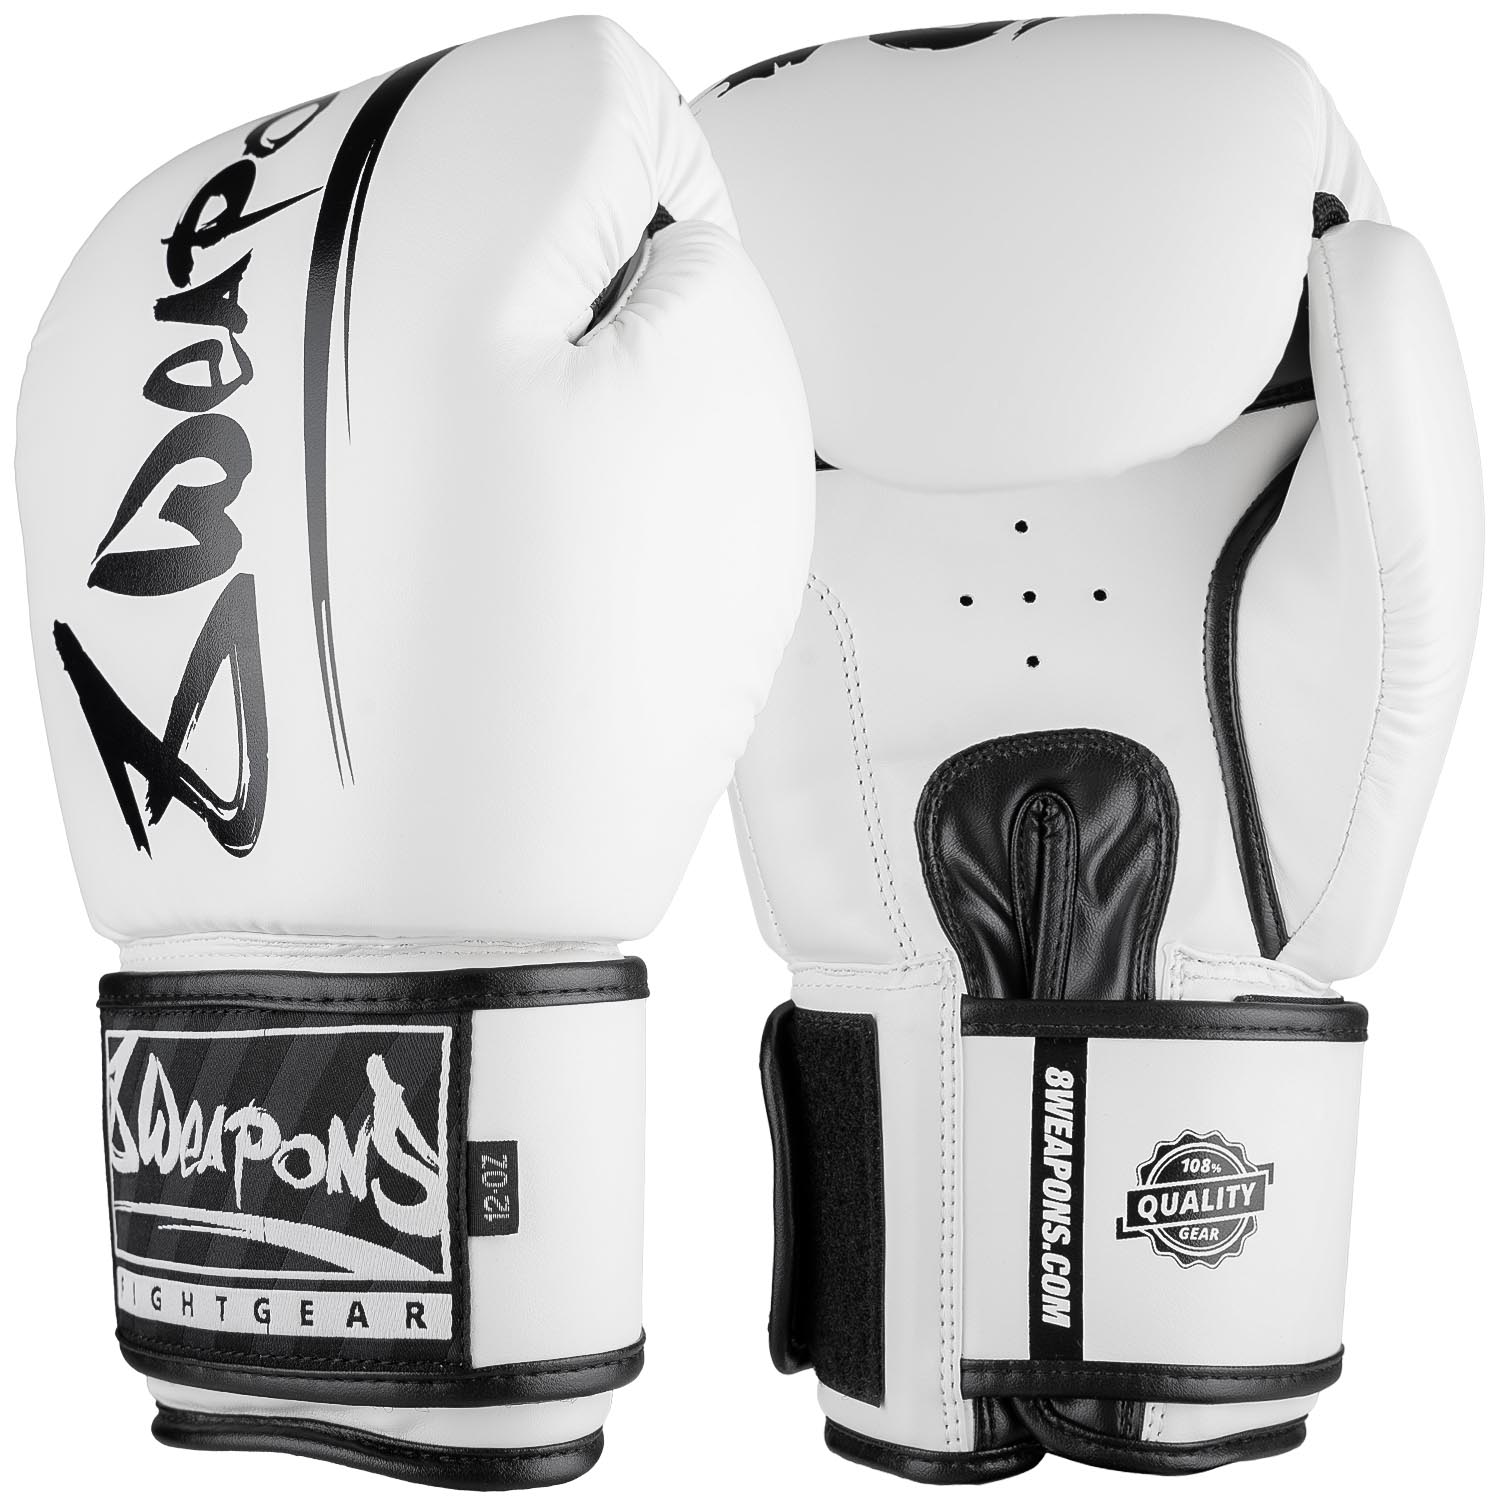 8 WEAPONS Boxing Gloves, Unlimited 2.0, white-black